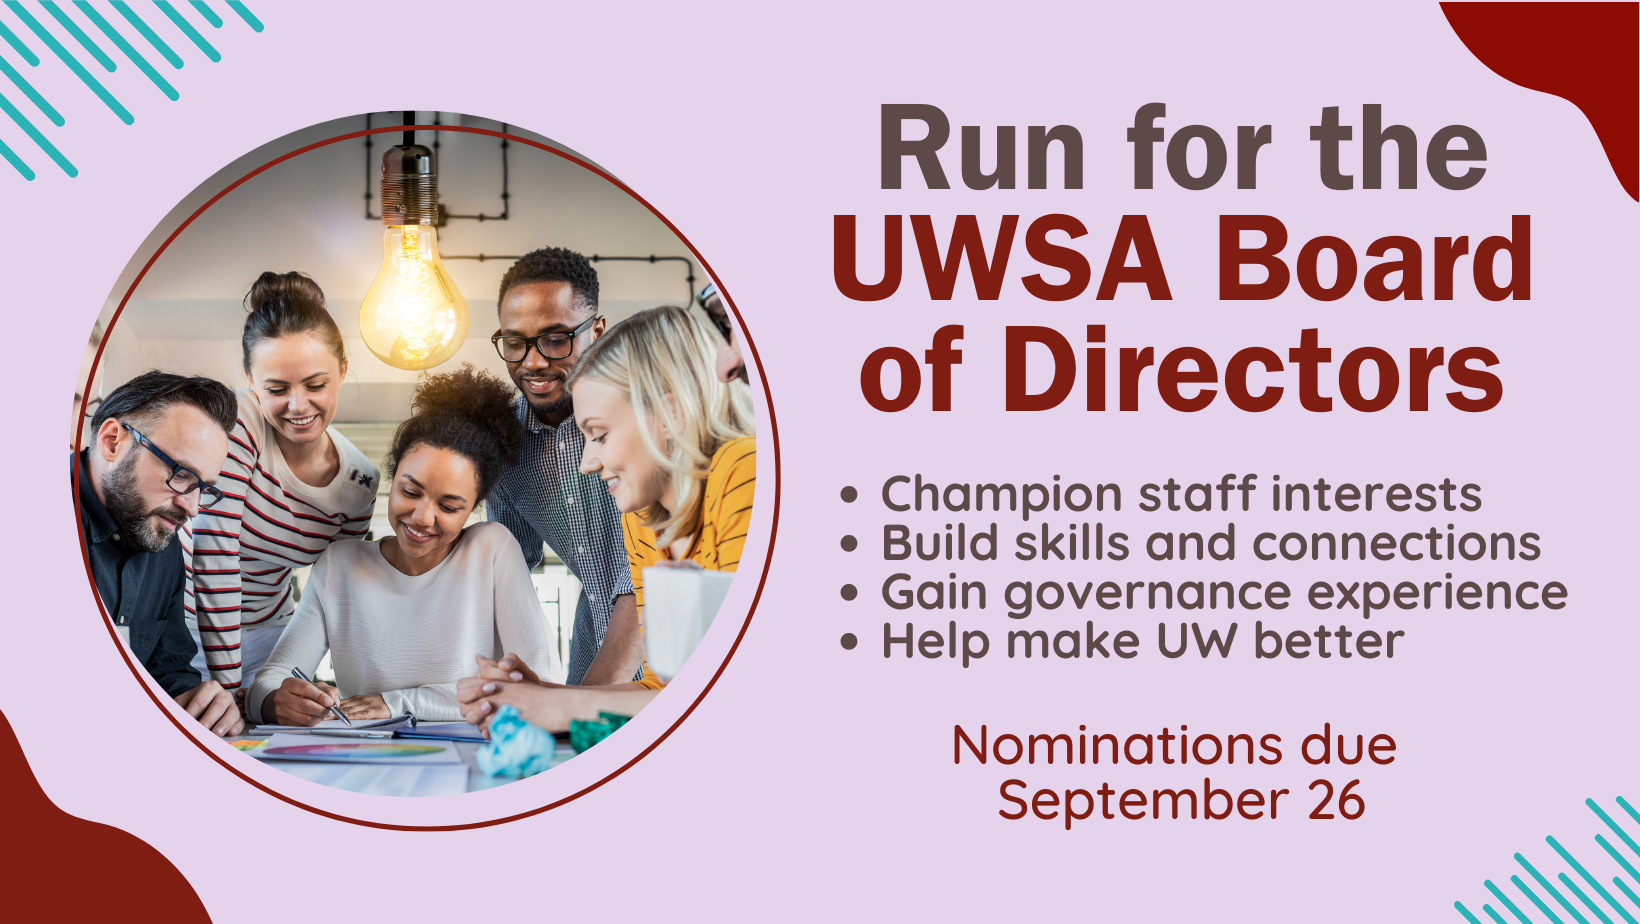 Run for the UWSA Board of Directors. A diverse group of people looking at something together.